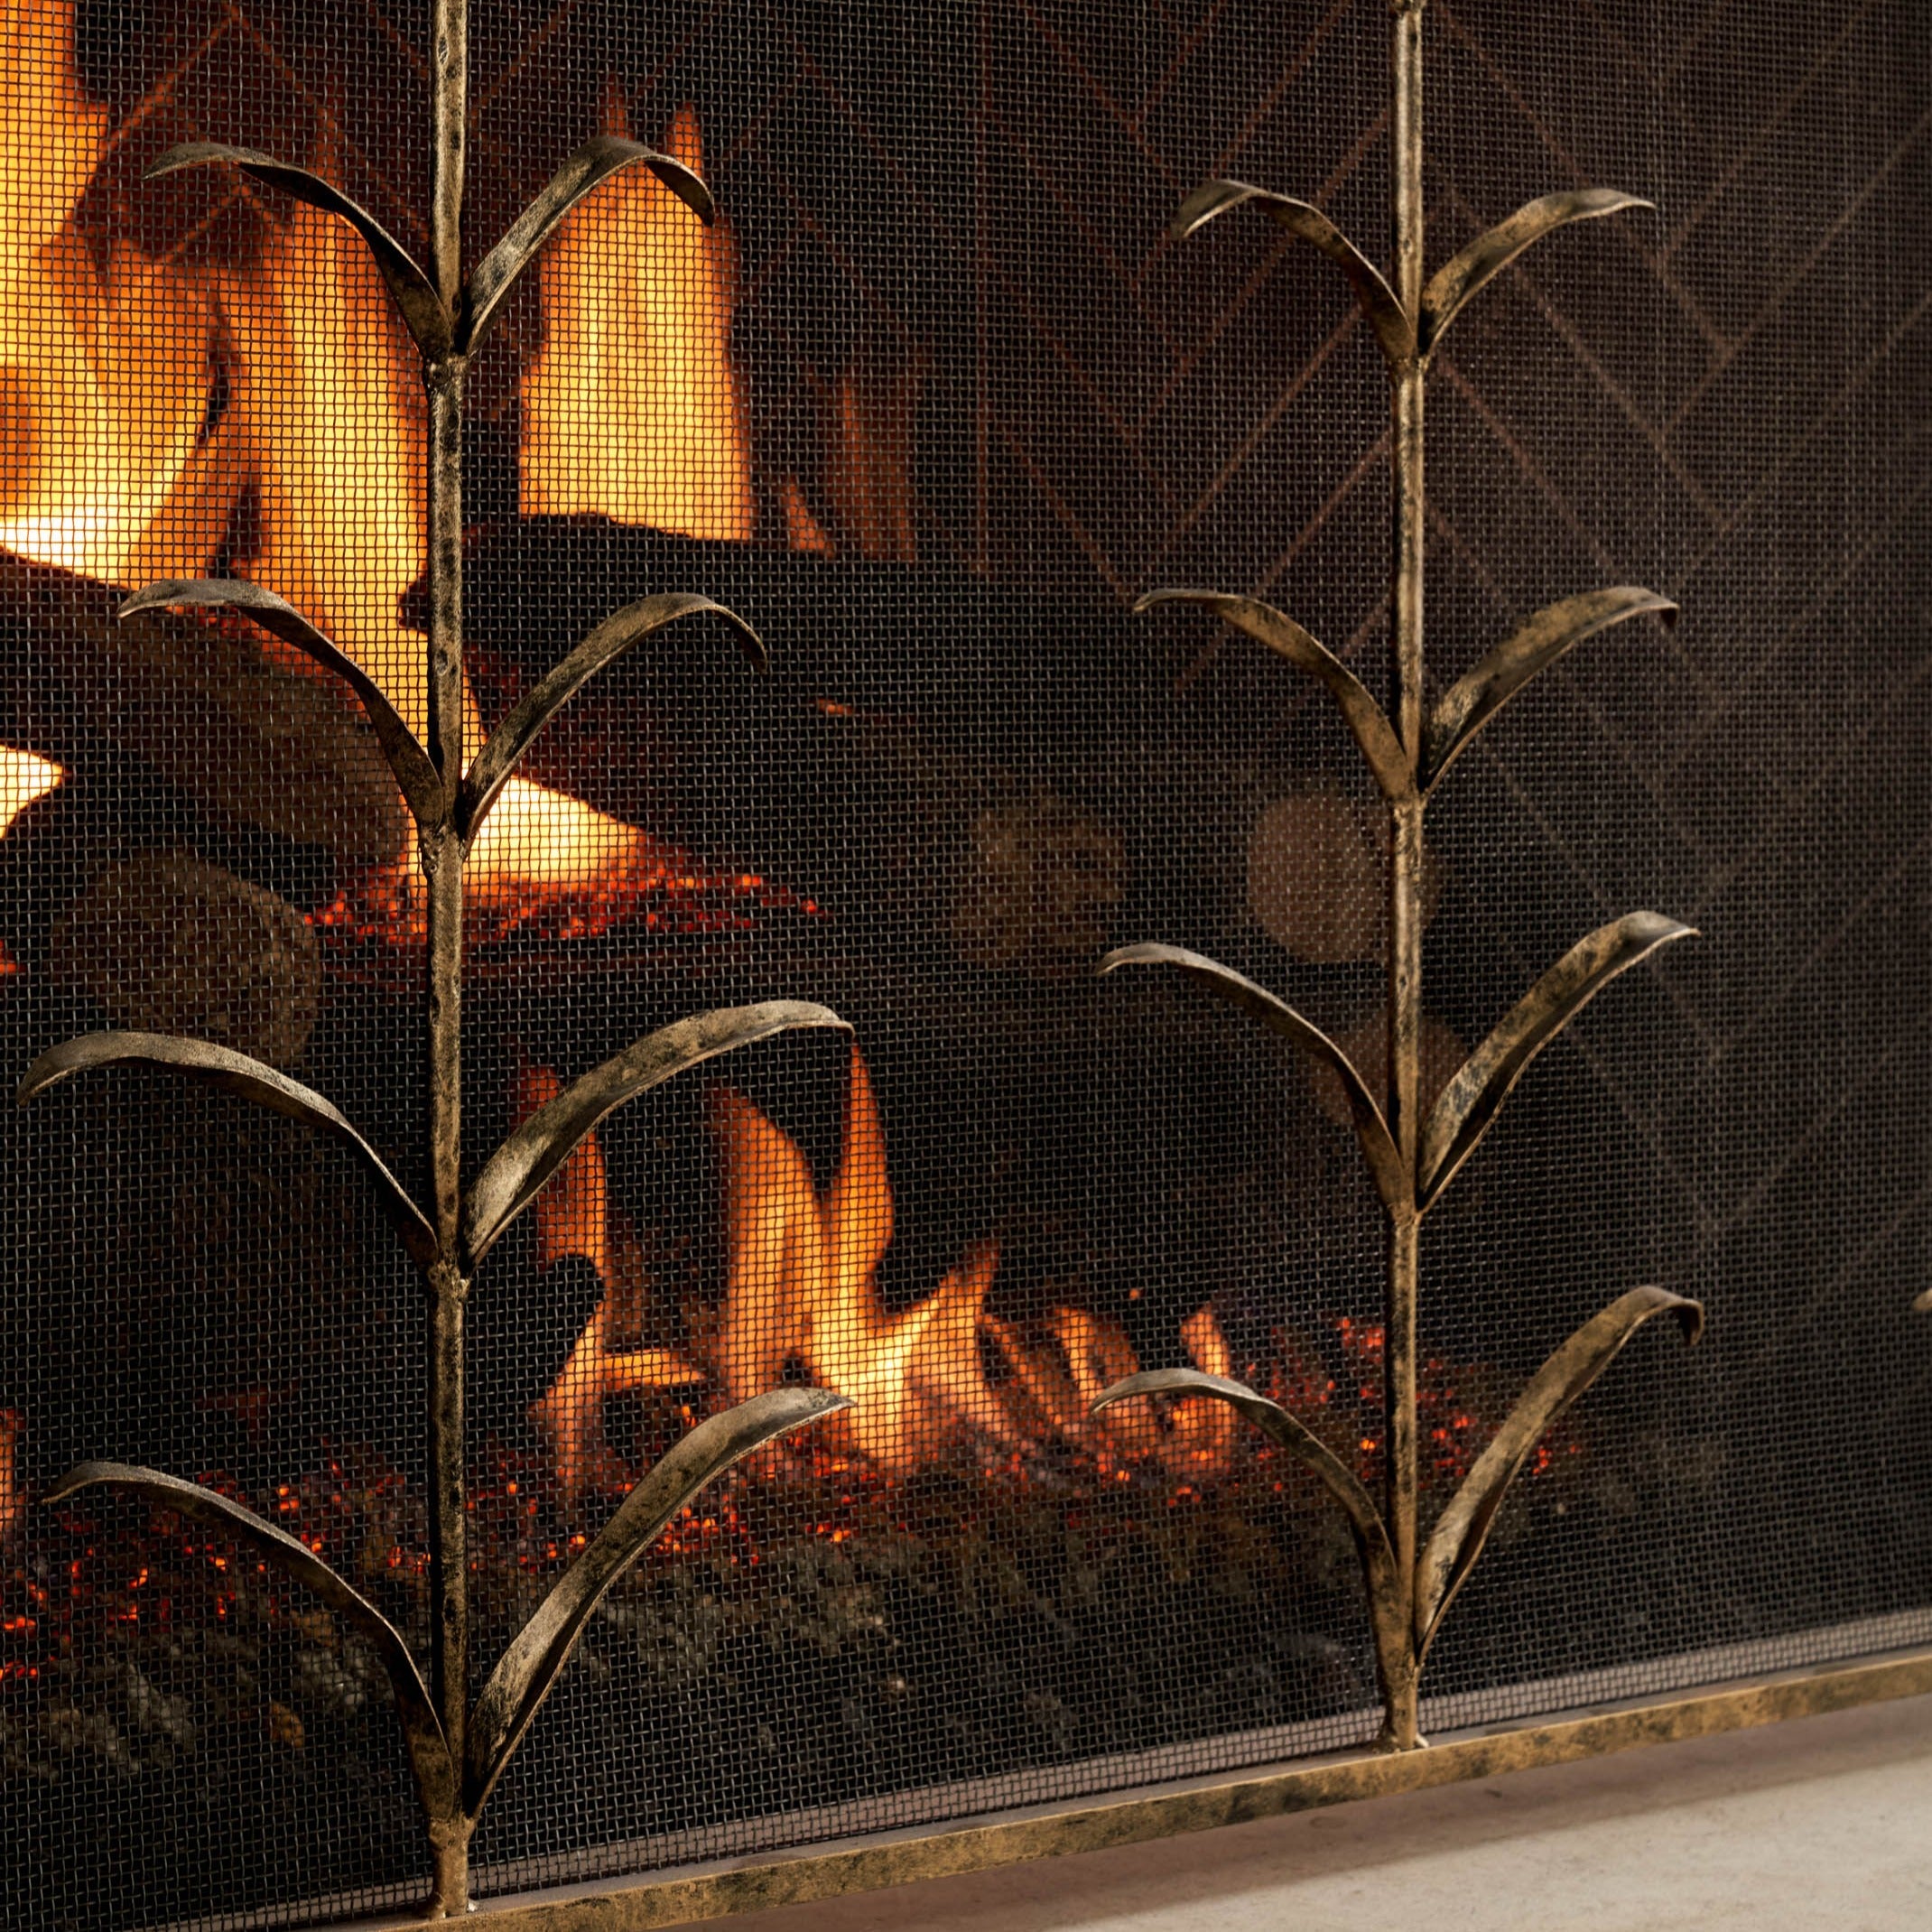 Lily Stems Fireplace Screen in Aged Gold